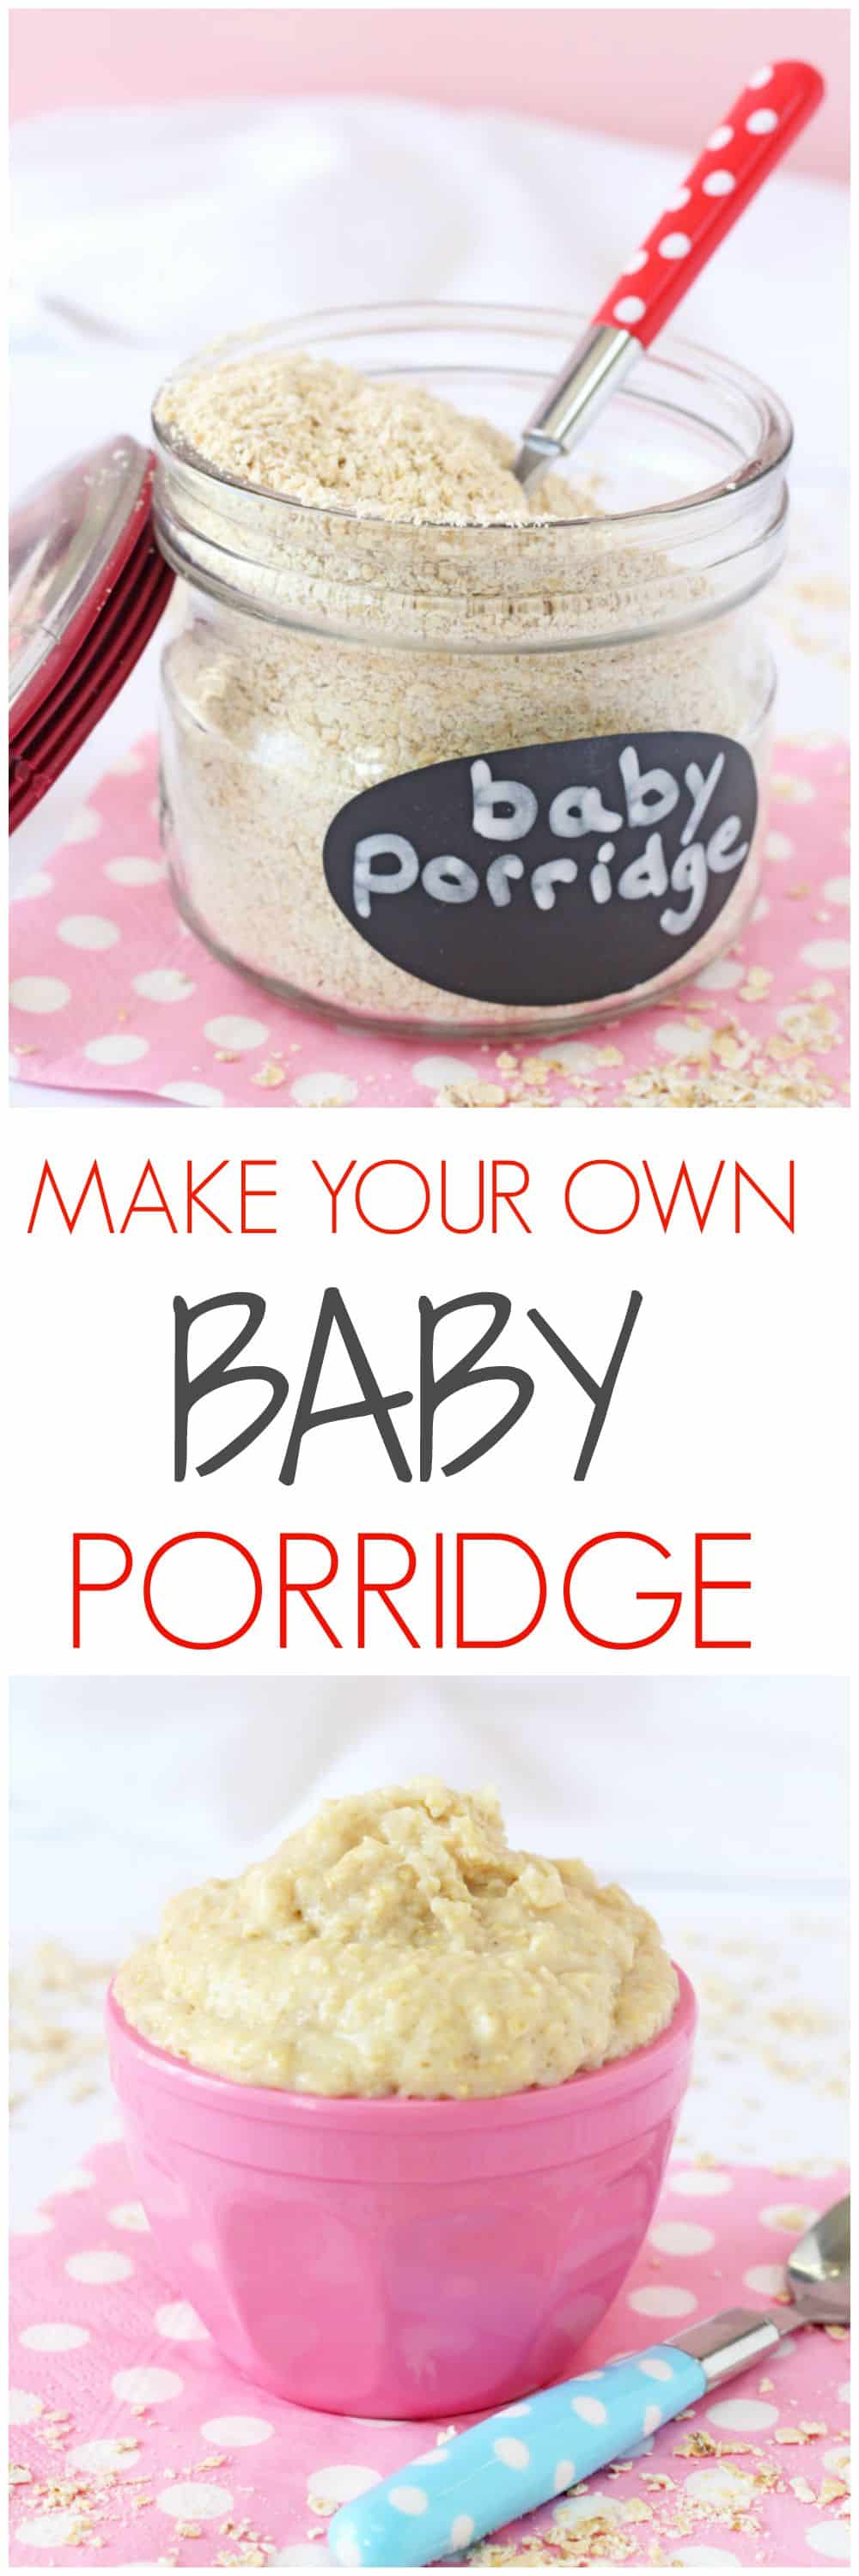 Making your own baby porridge or baby oatmeal is super easy and a much cheaper way to feed a weaning baby than the packaged variety | My Fussy Eater blog